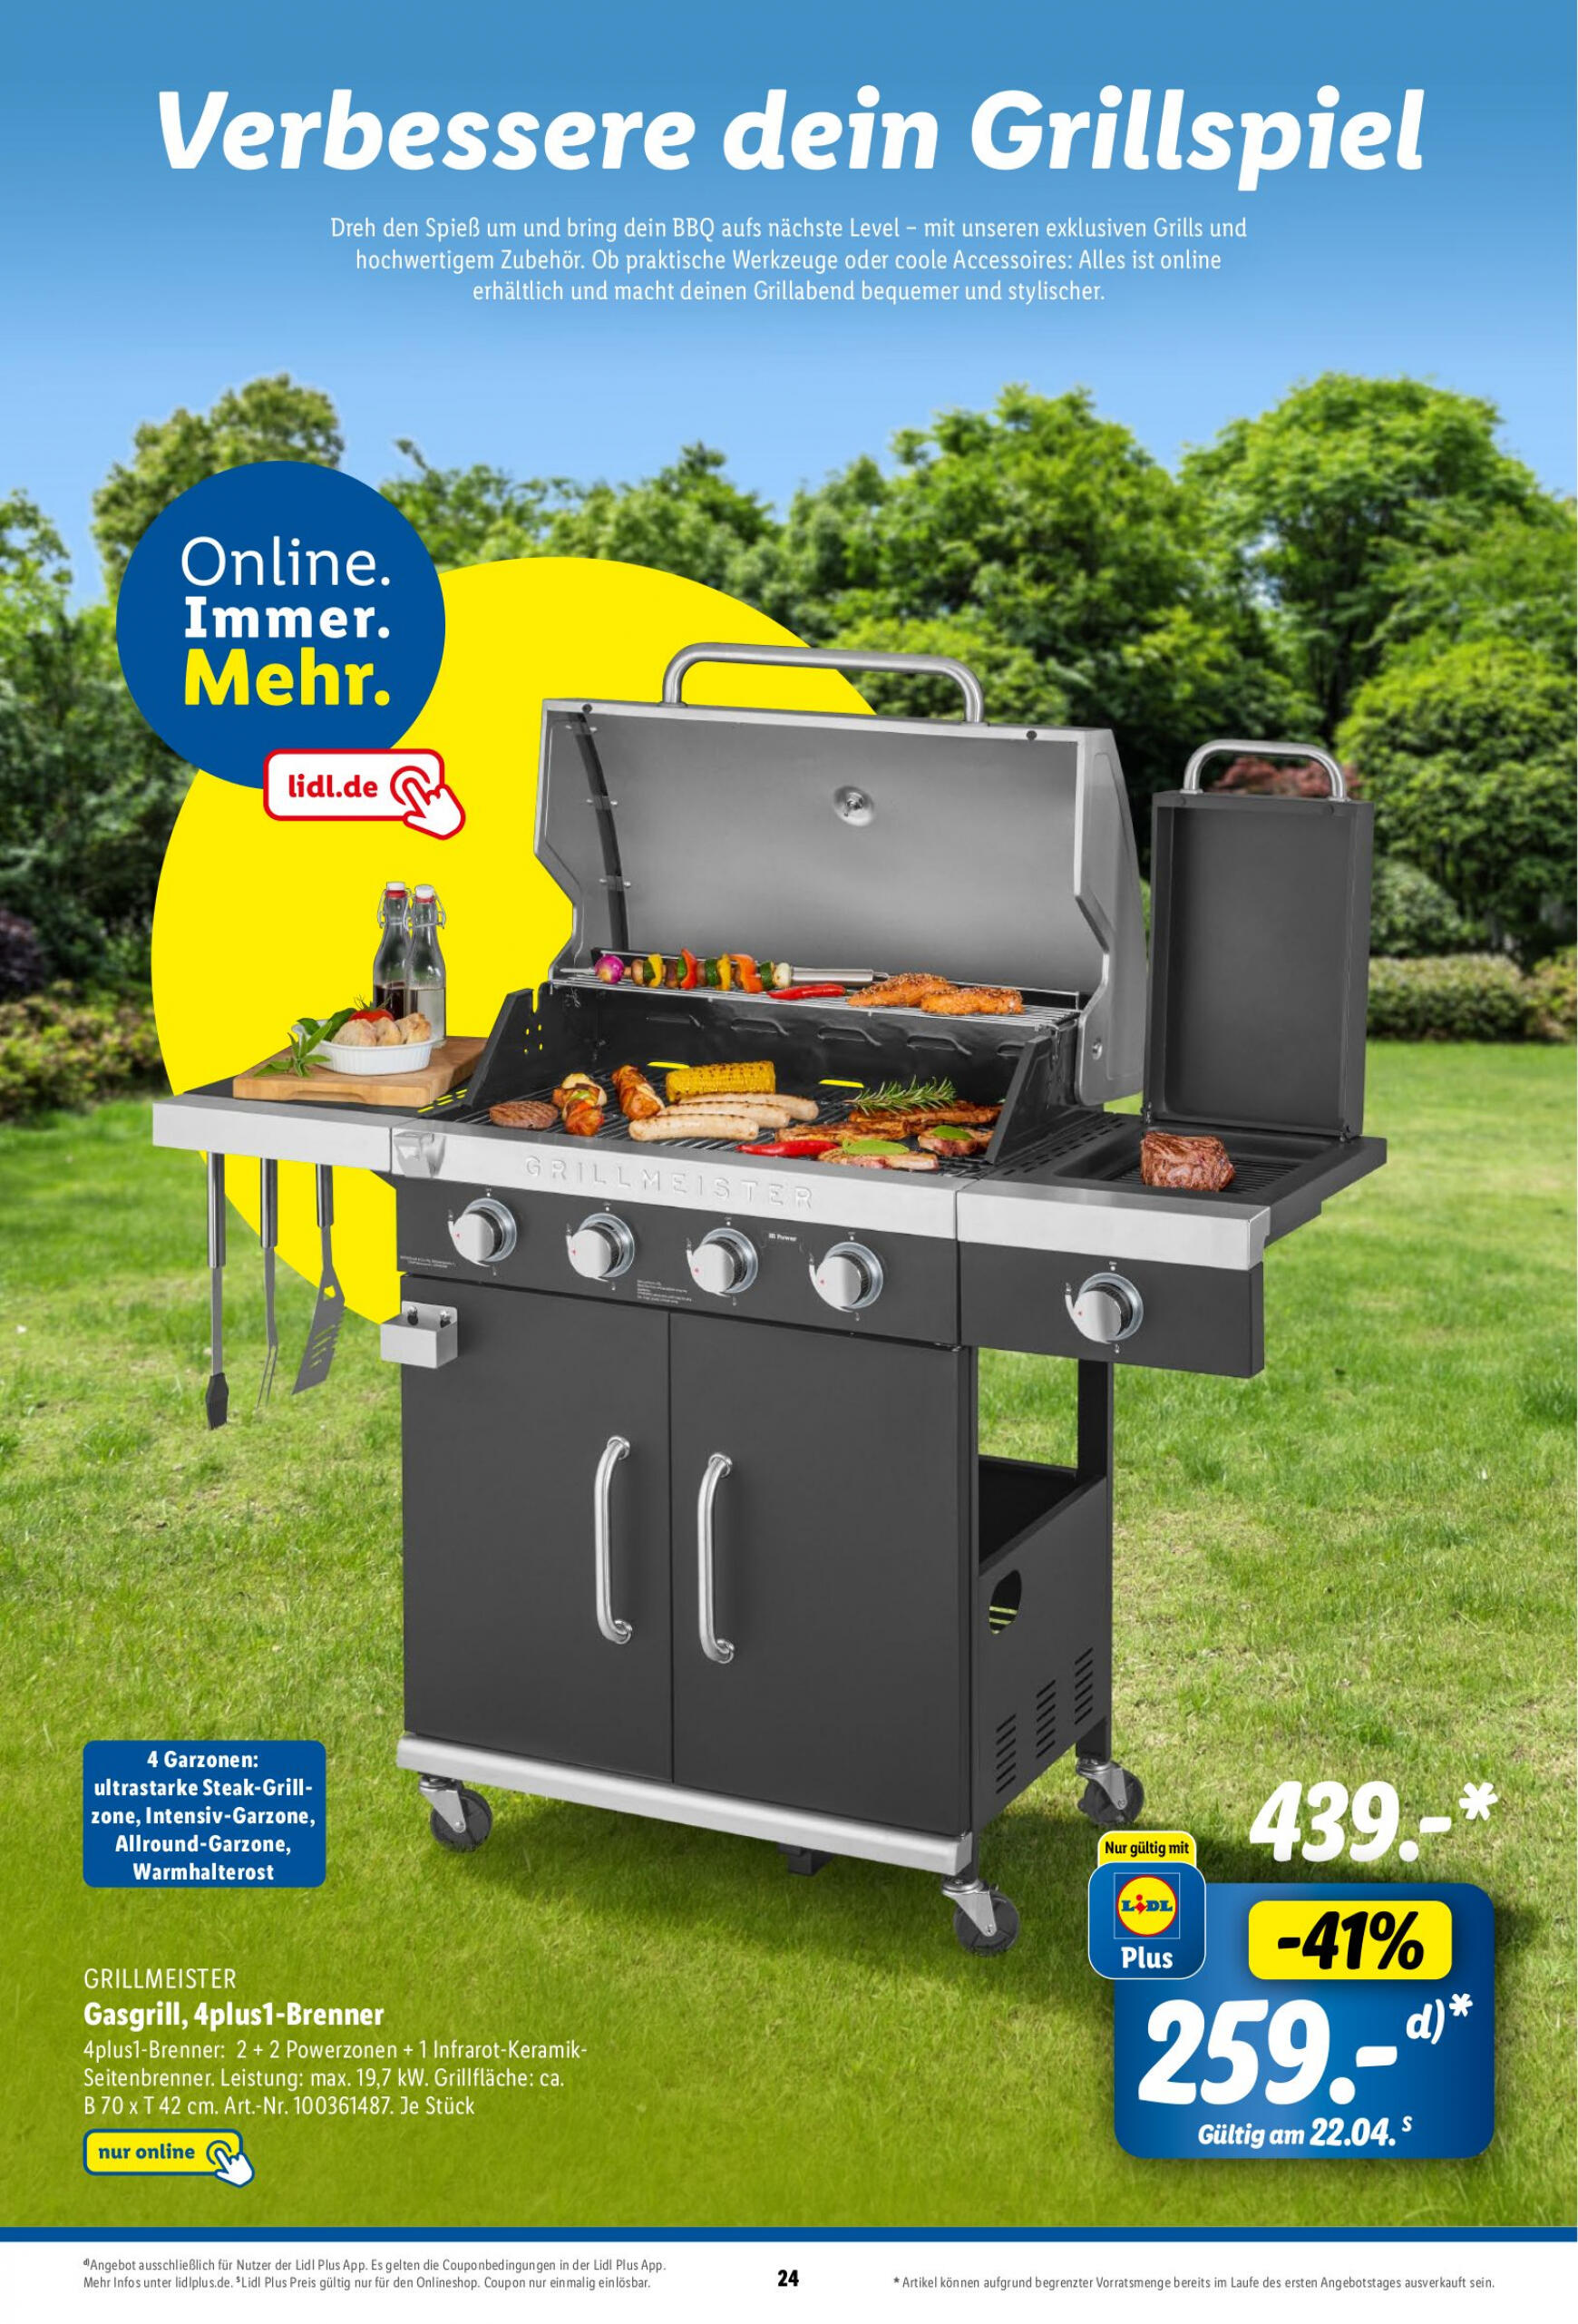 lidl - Flyer Lidl - Grillmagazin aktuell 22.04. - 30.06. - page: 24